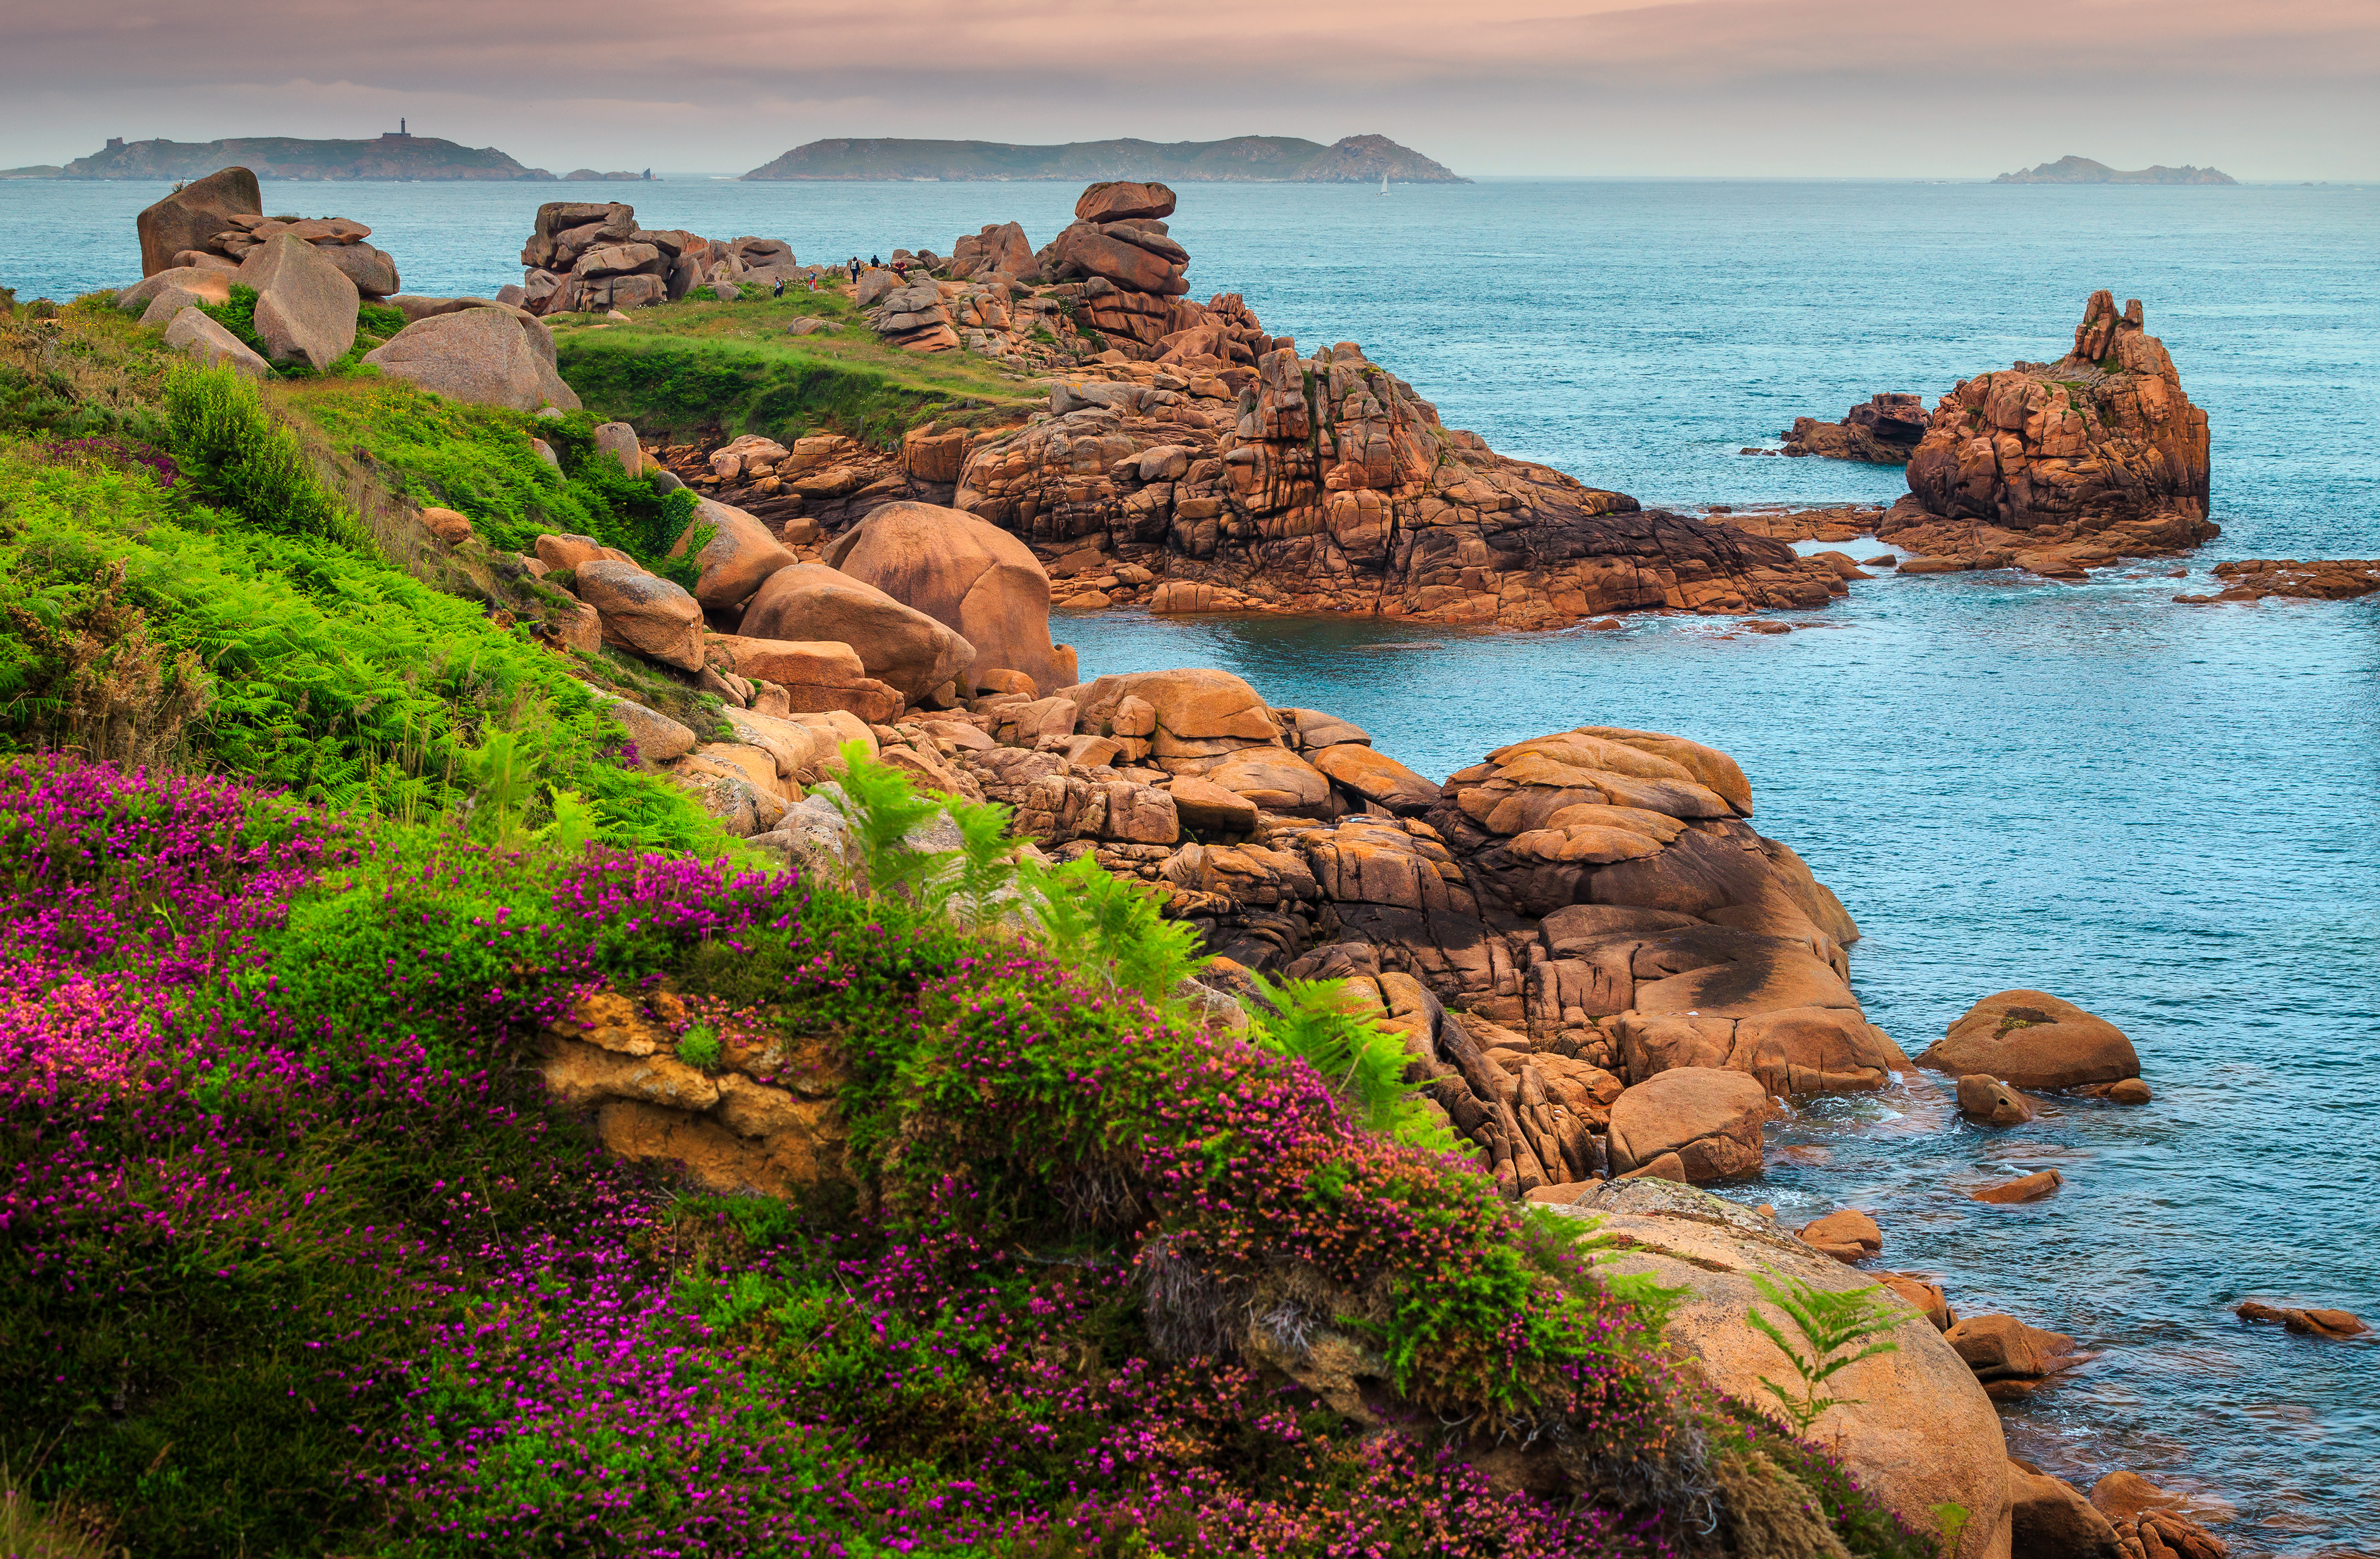 Stunning colorful flowers and spectacular coastline with cliffs in Perros-Guirec, Brittany region, France, Europe